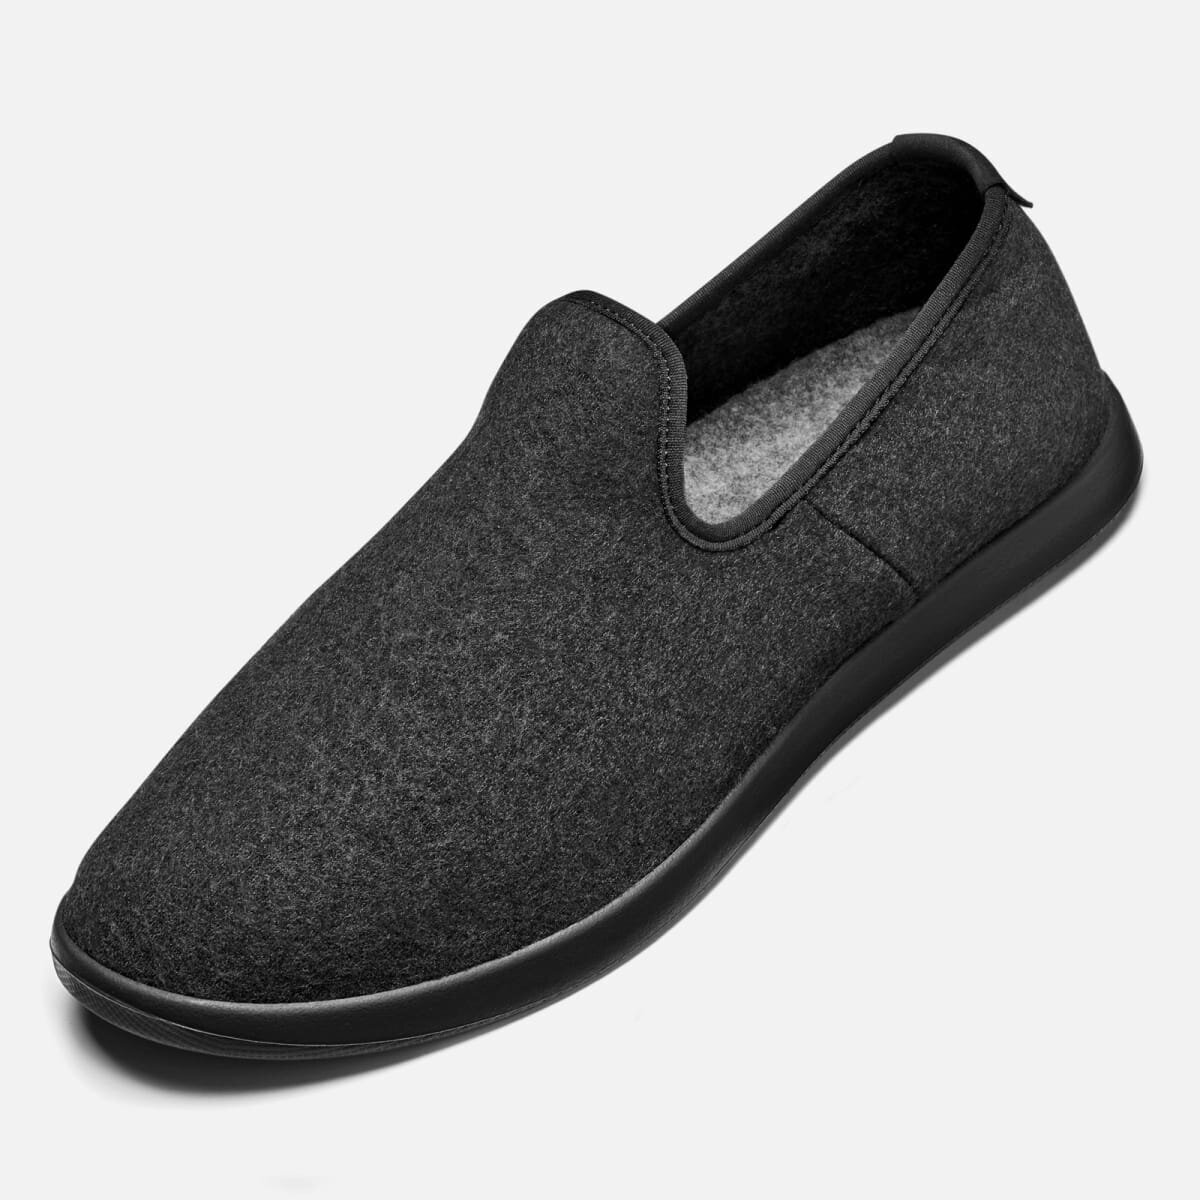 shoes for men without less